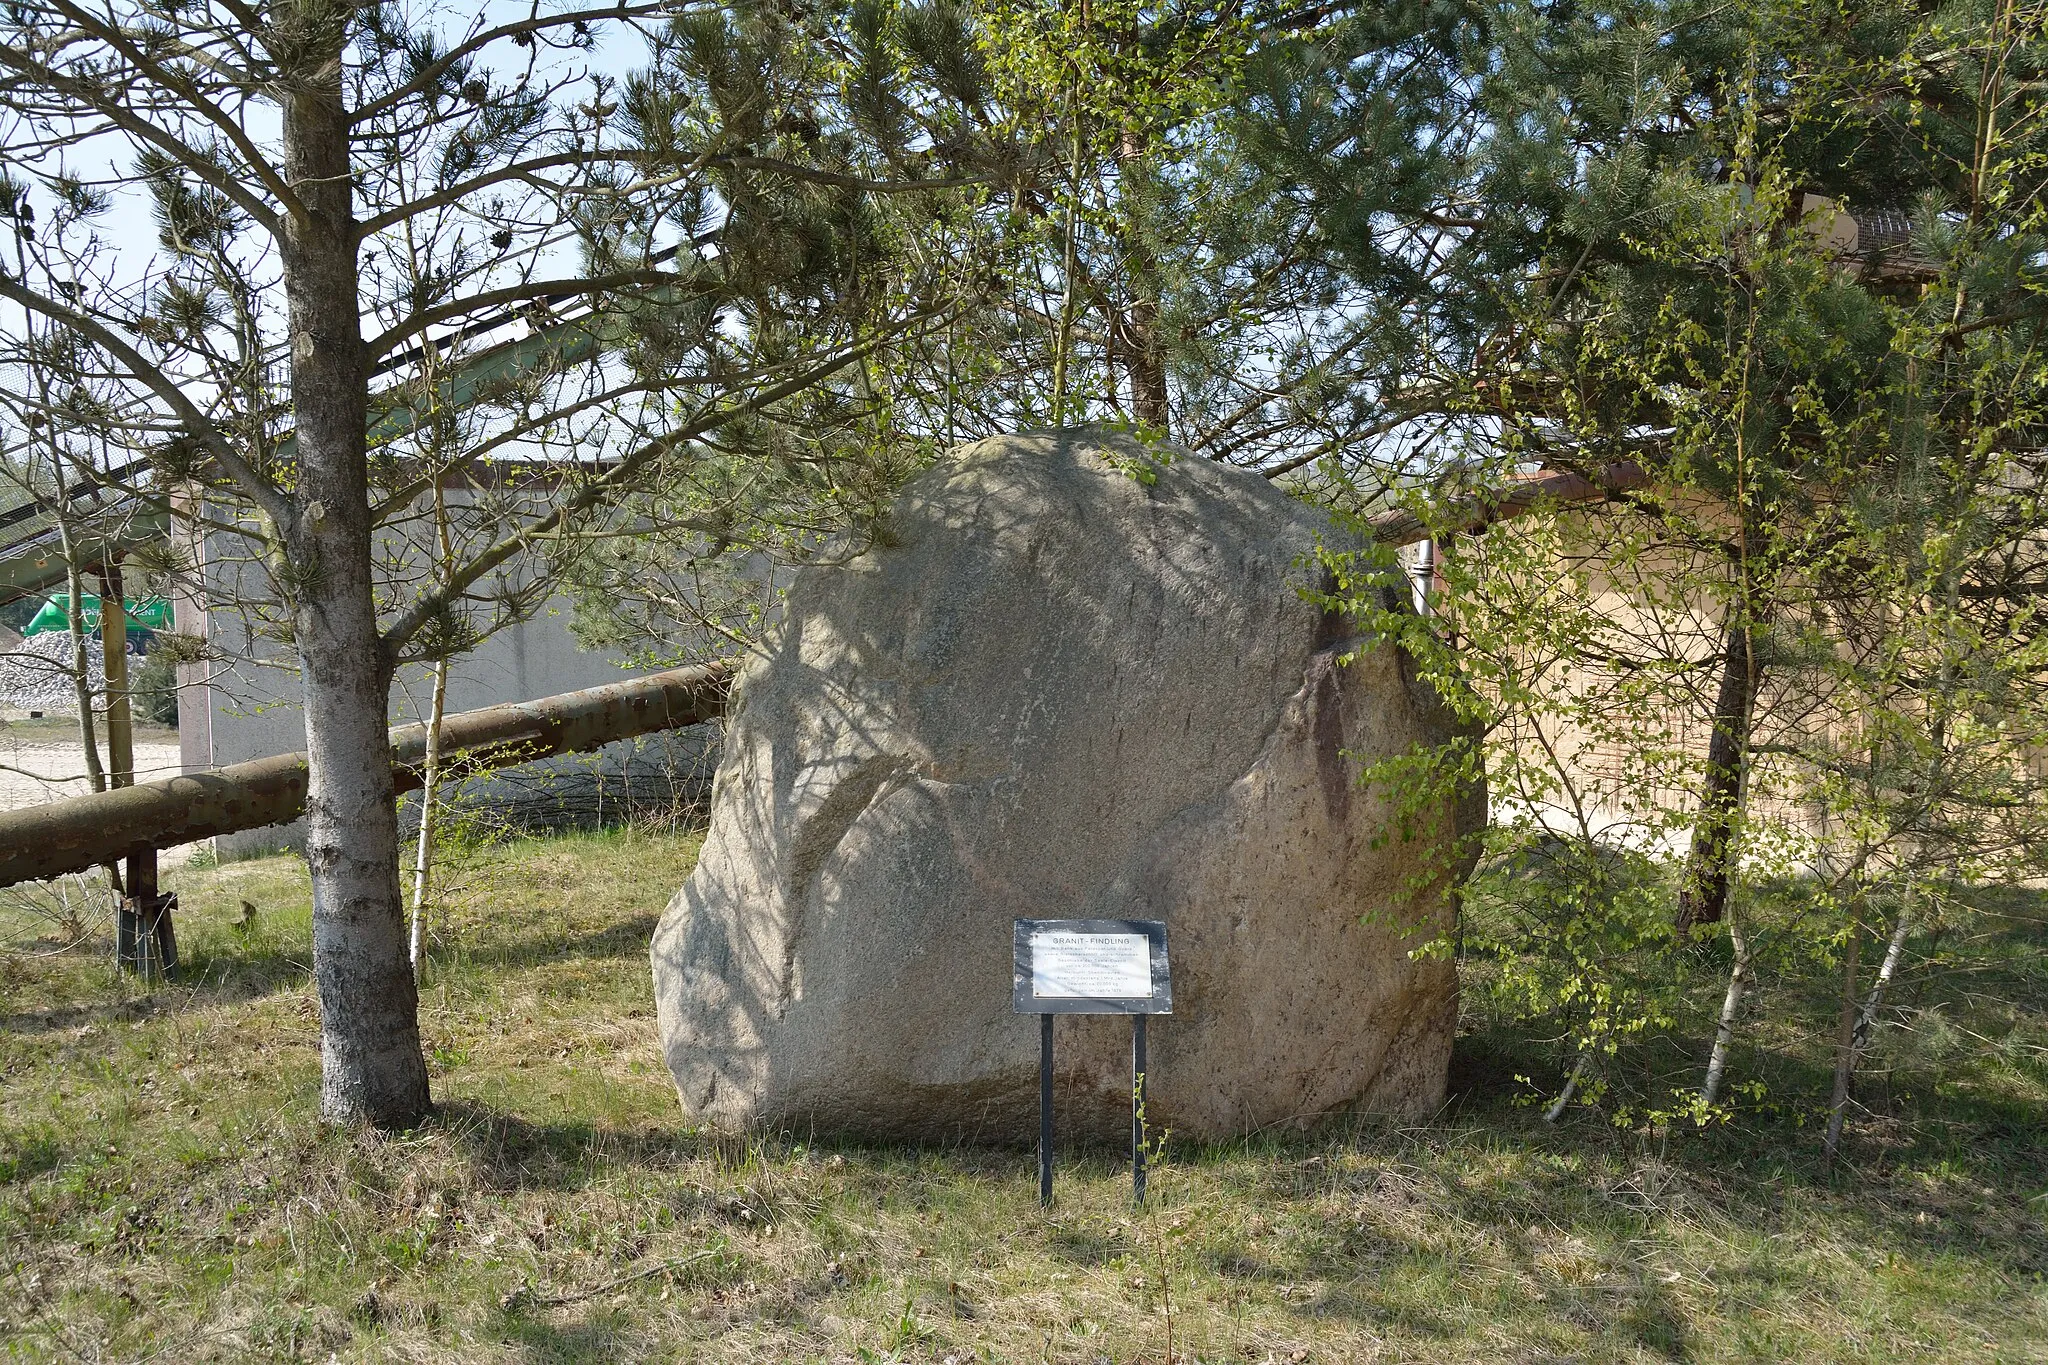 Photo showing: A glacial erratic near Wohlenbeck (municipality of Lamstedt) is the natural monument CUX 207 in Germany